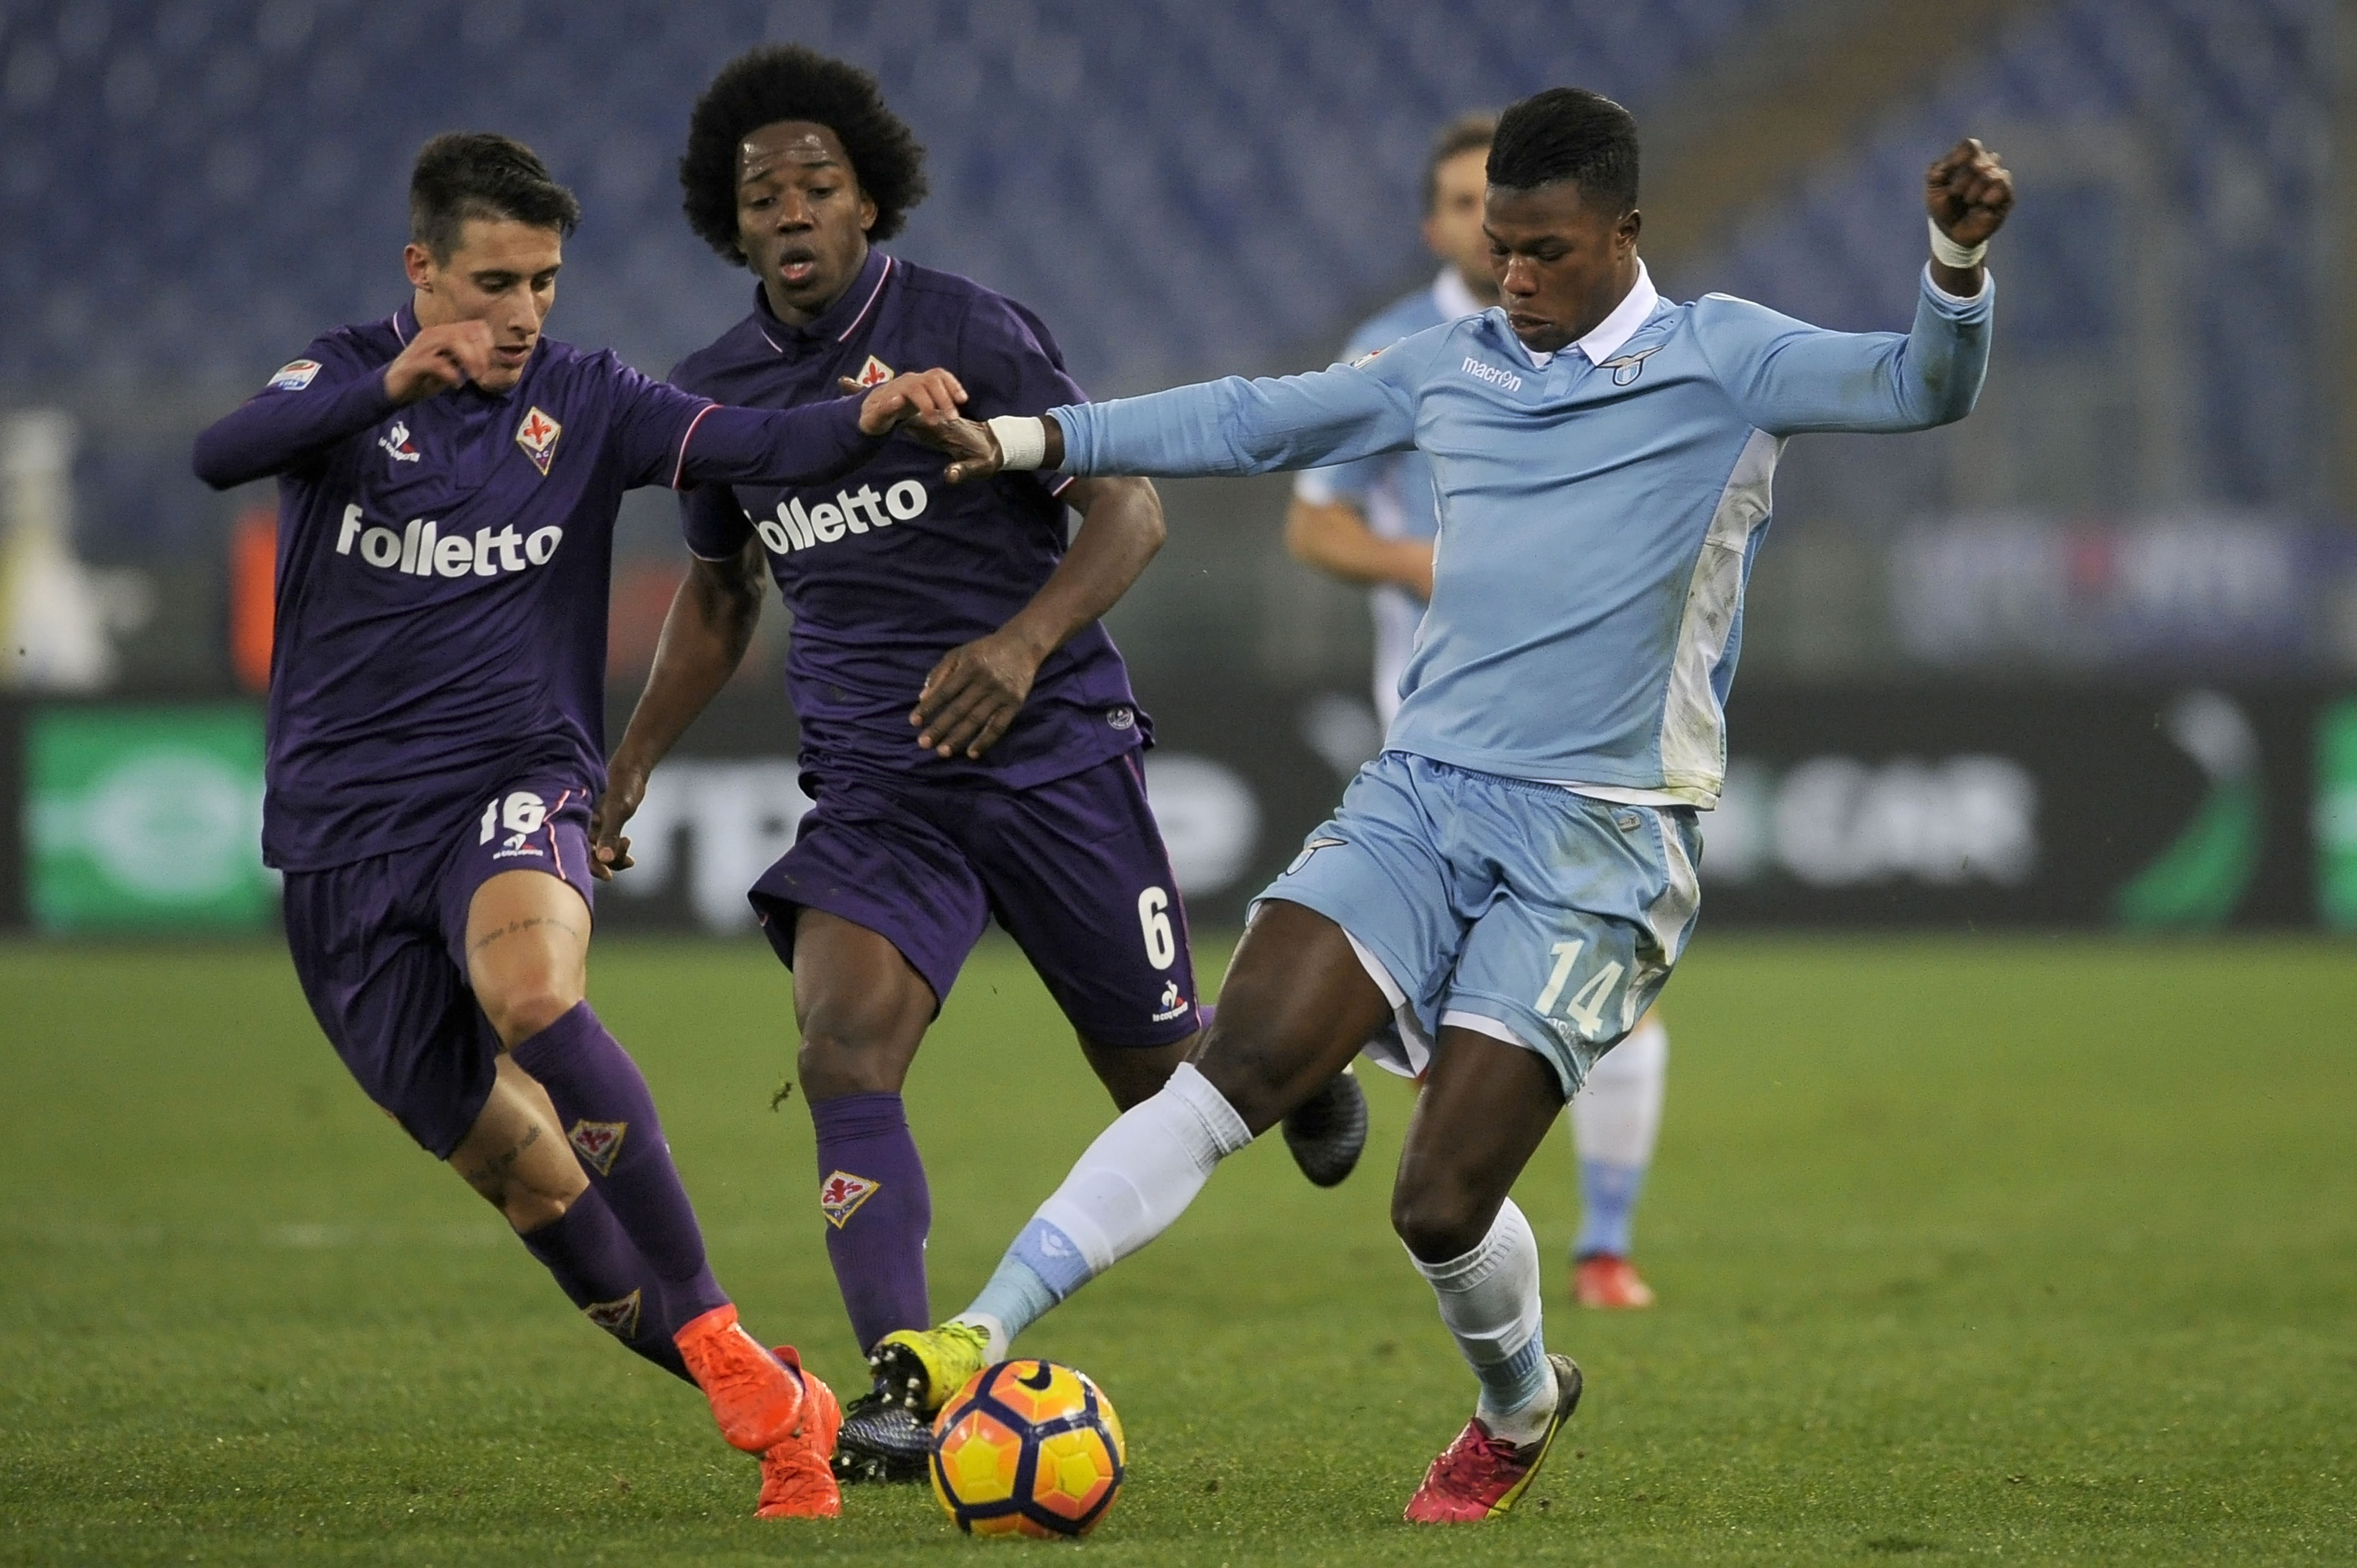 ROME, ROMA - DECEMBER 18:  Balde Diao Keita of SS Lazio competes for the ball with Cristian Tello ACF Fiorentina during the Serie A match between SS Lazio and ACF Fiorentina at Stadio Olimpico on December 18, 2016 in Rome, Italy.  (Photo by Marco Rosi/Getty Images)